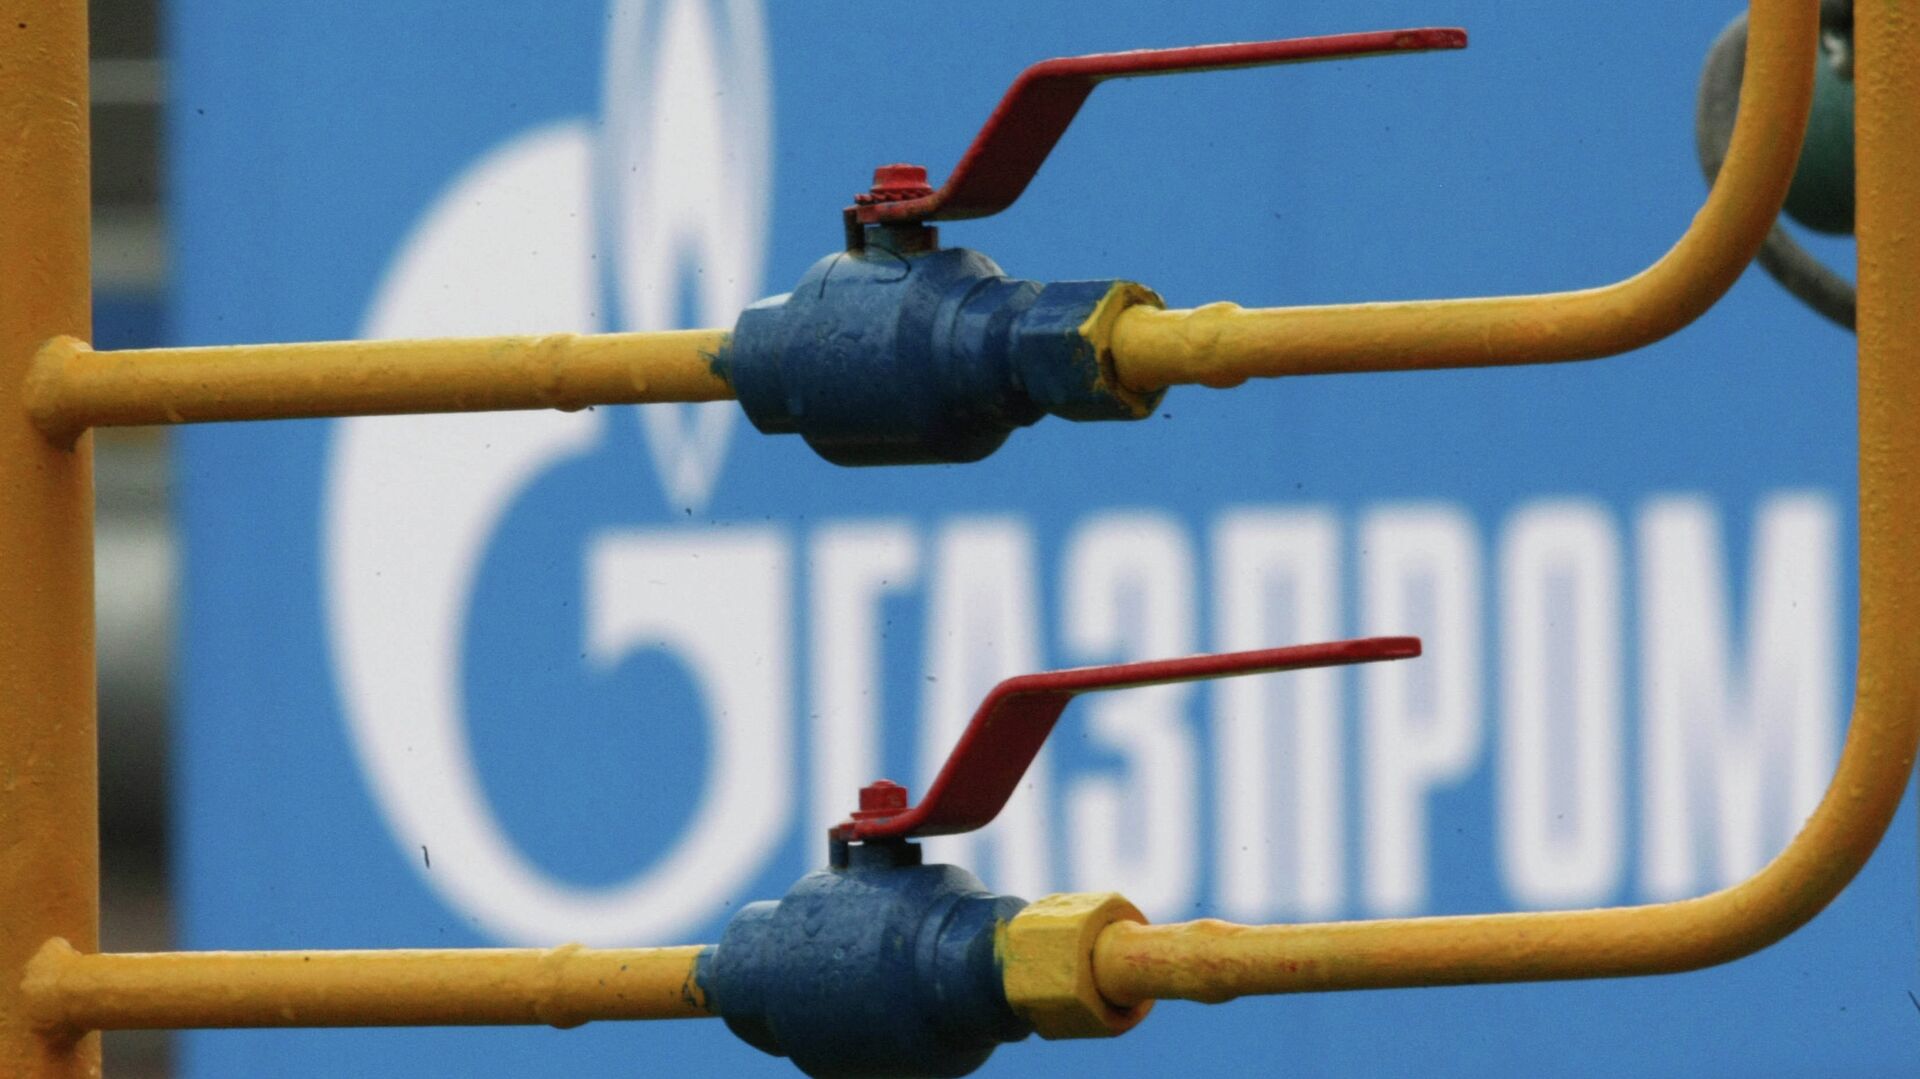 Russia's energy giant Gazprom considers European Commission's anti-trust charges unfounded - Sputnik International, 1920, 20.05.2022